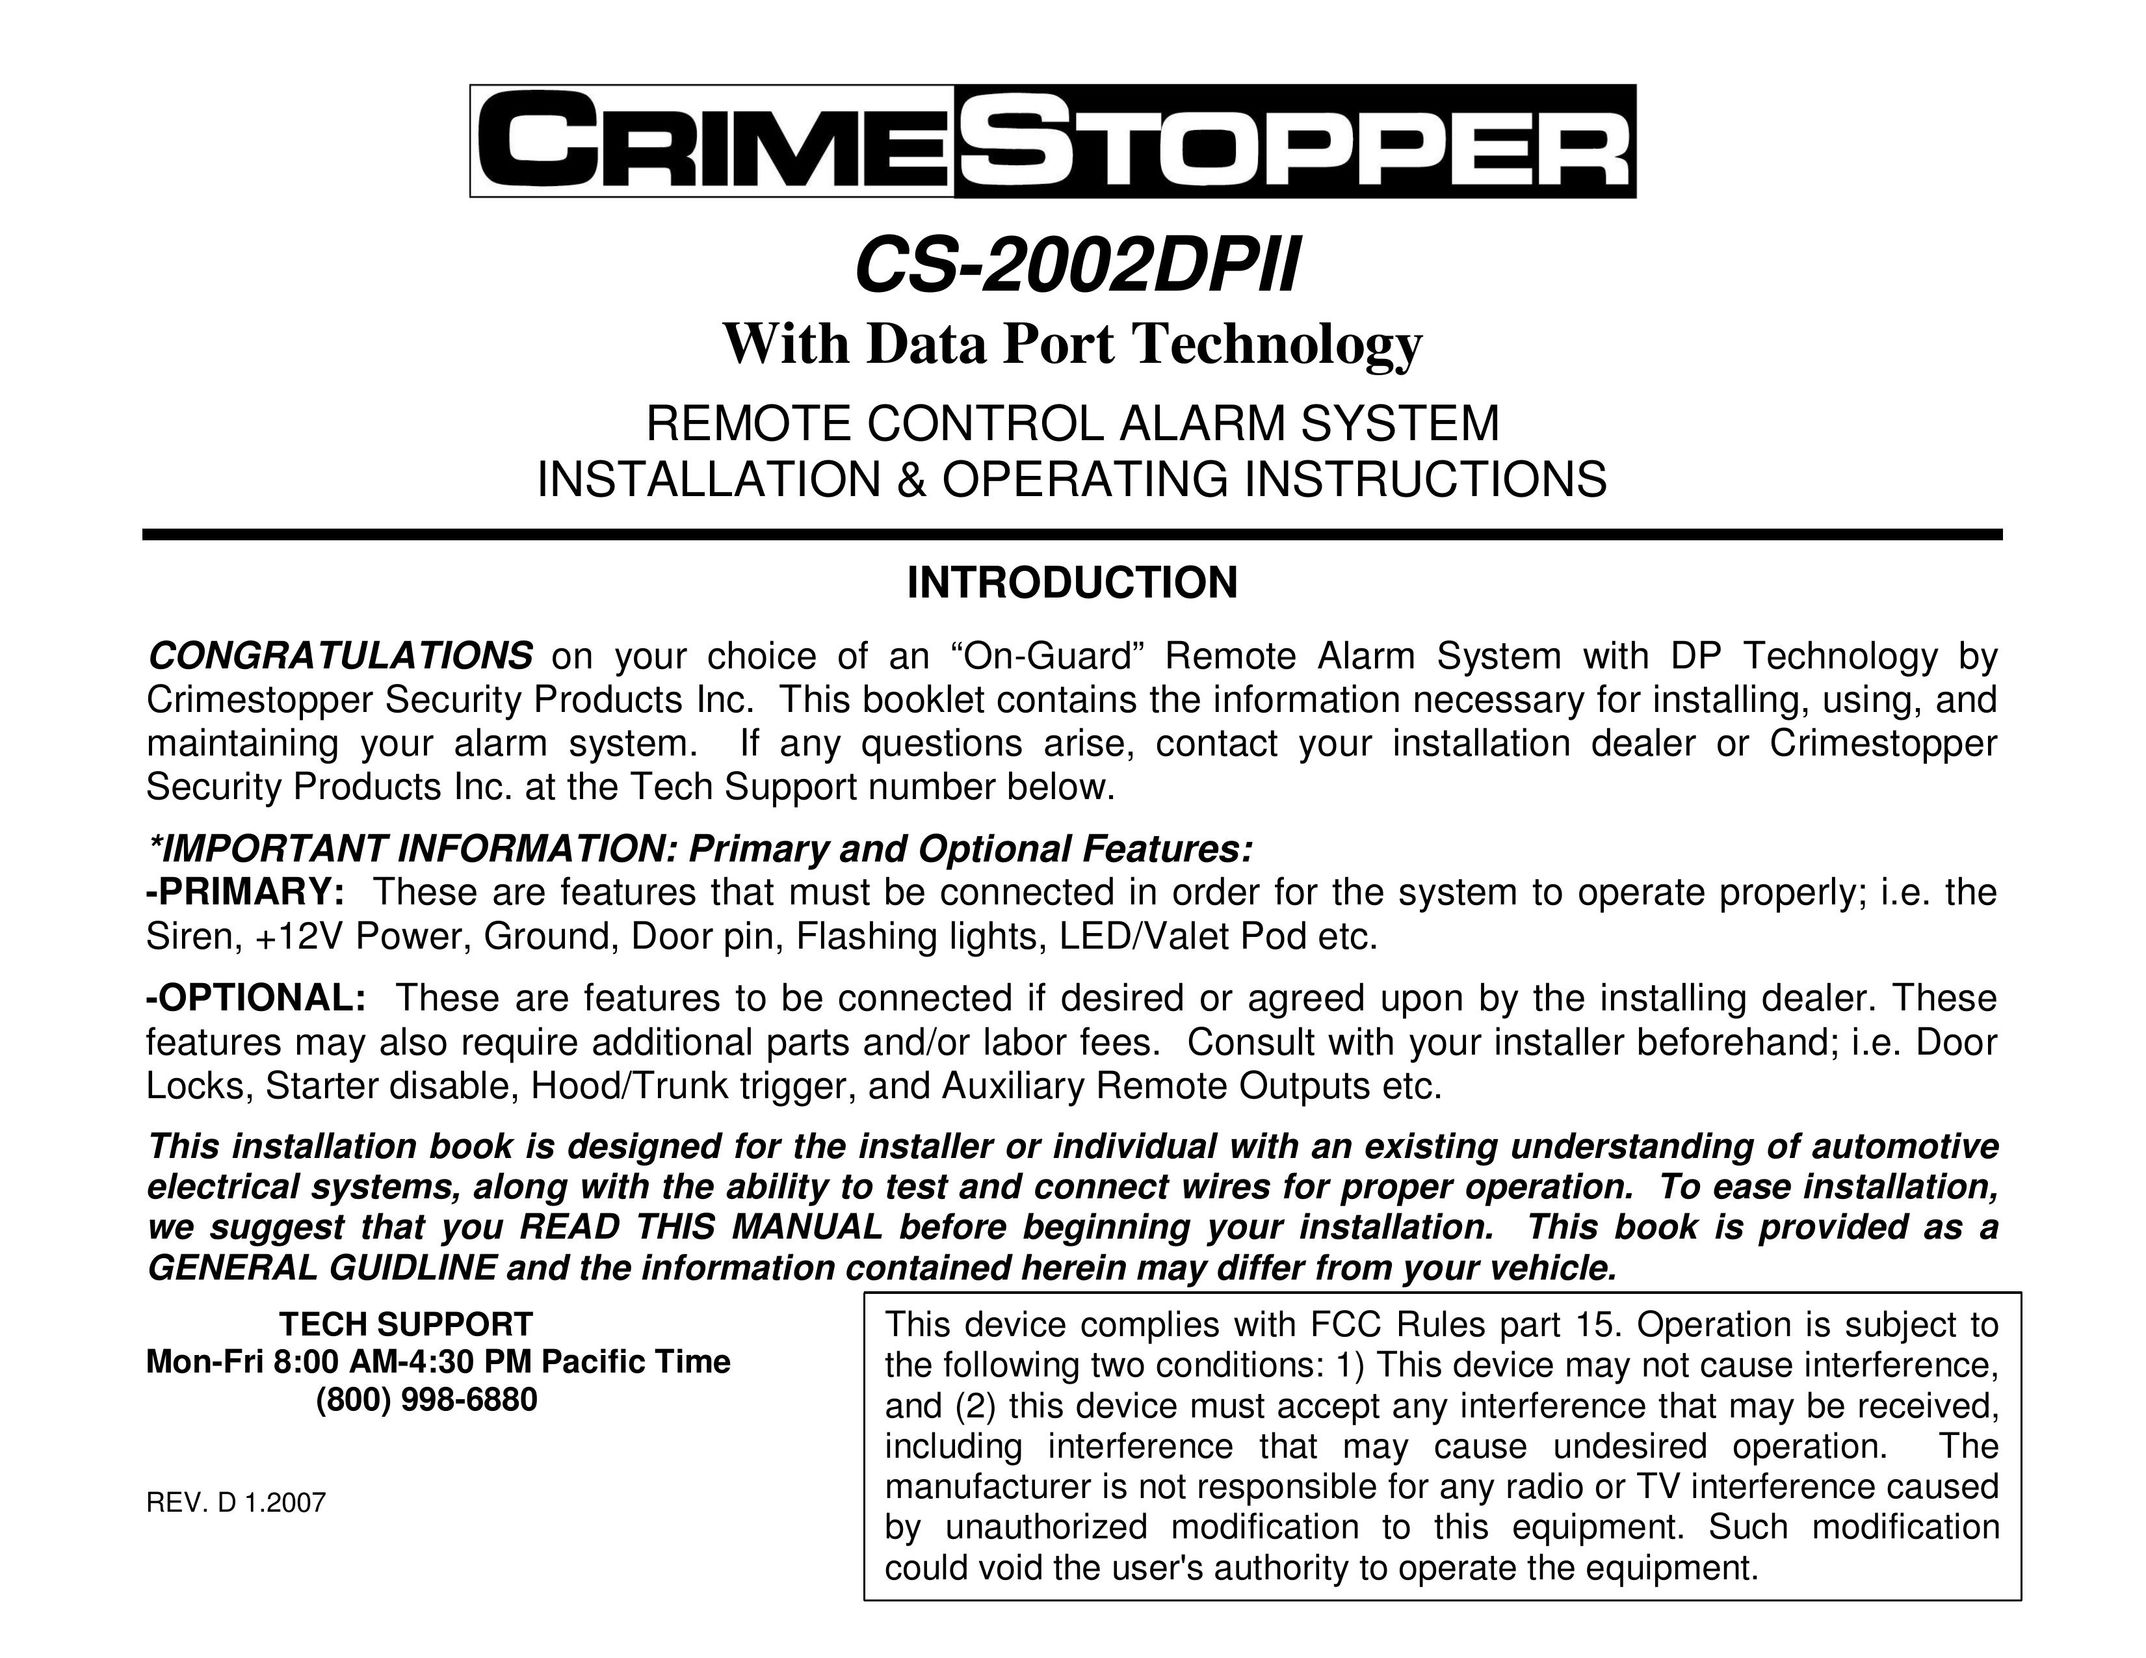 Crimestopper Security Products CS-2002DPII Home Security System User Manual